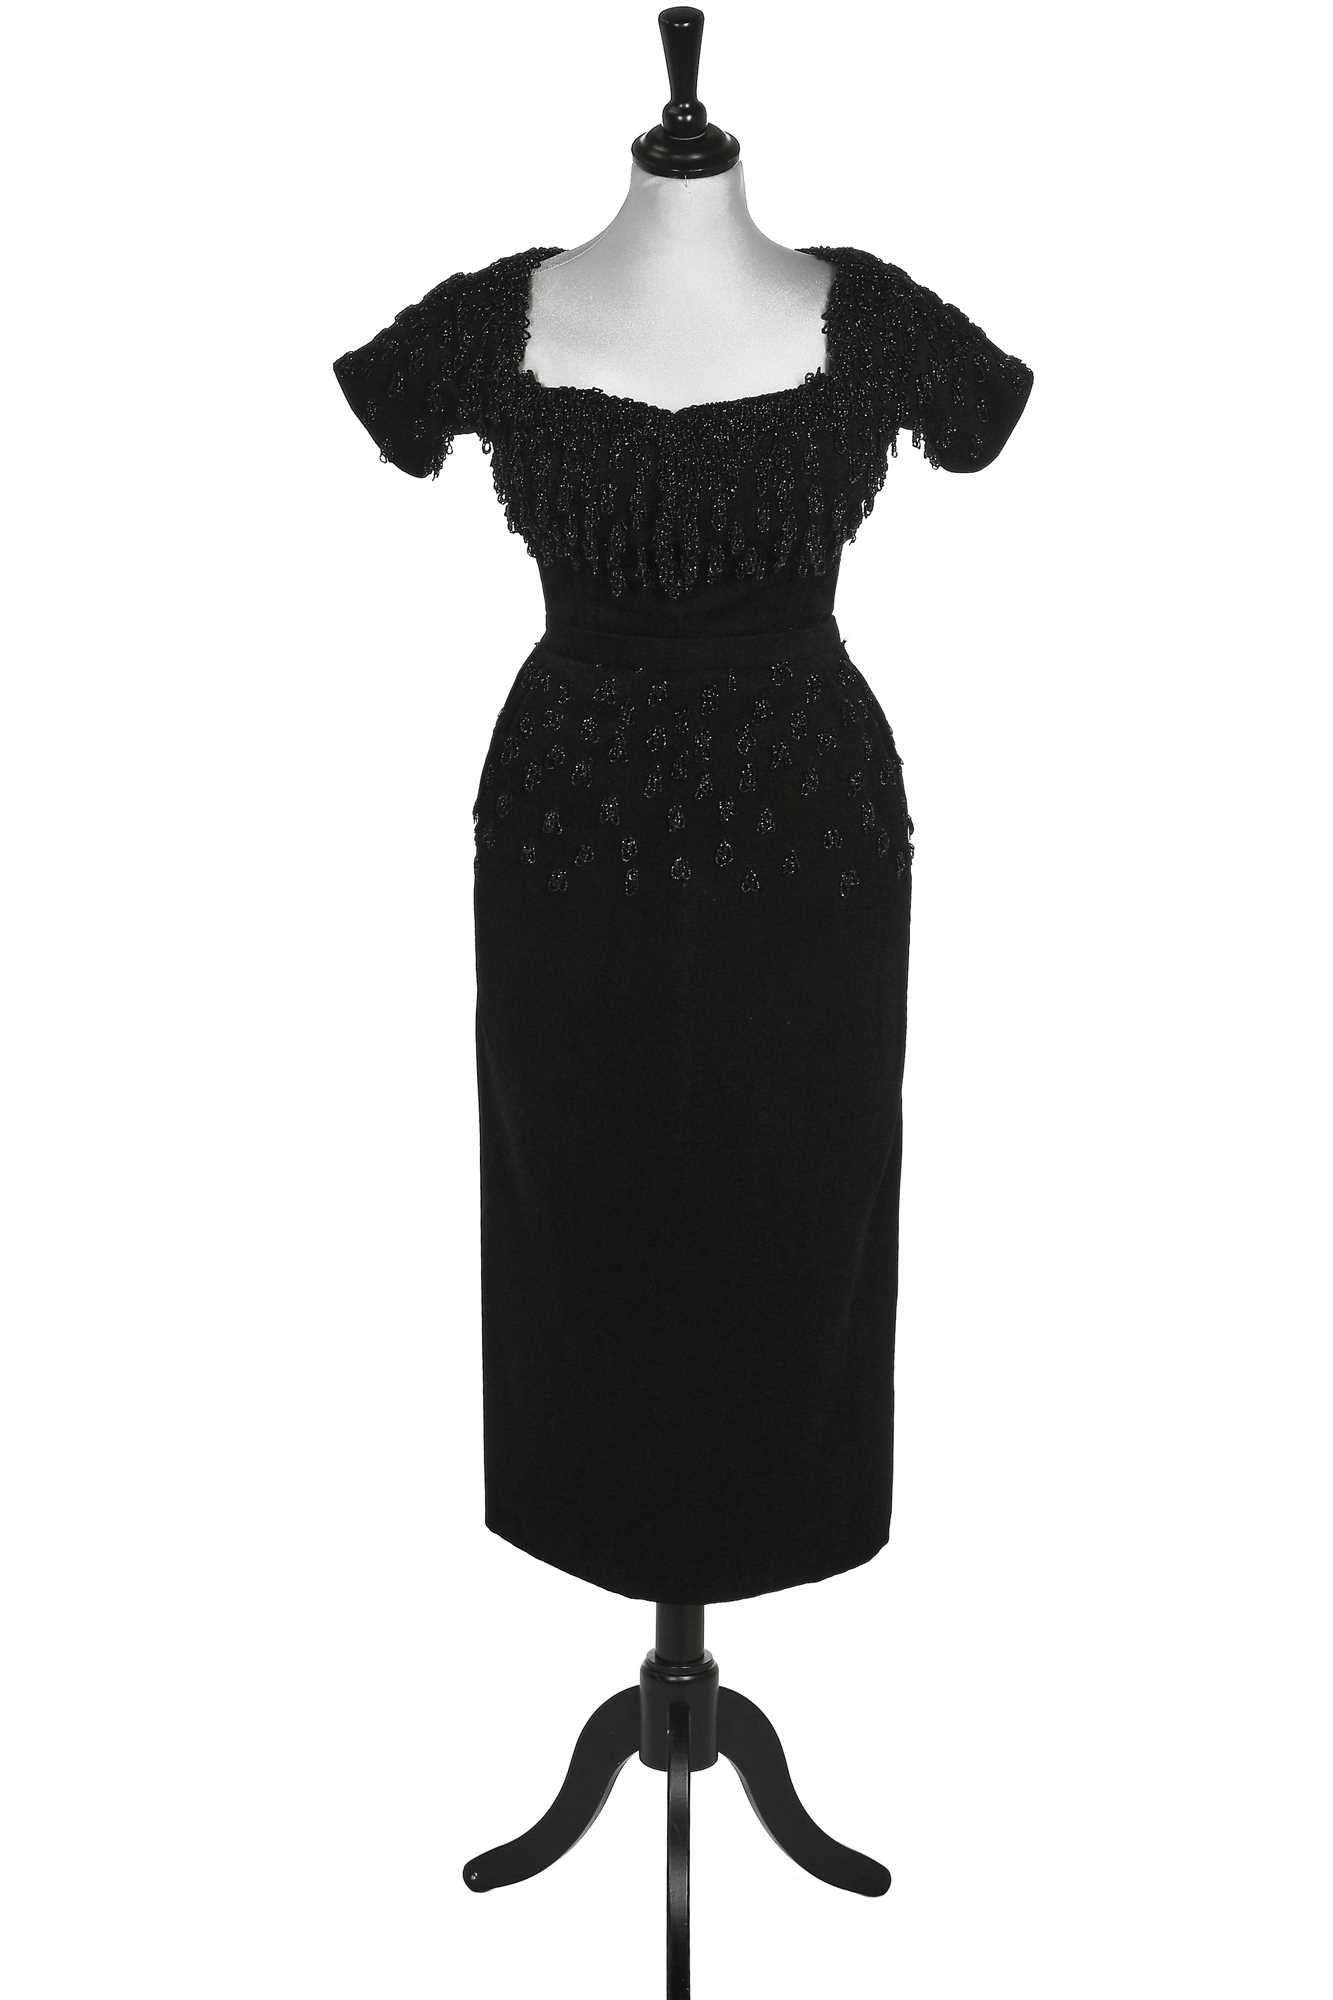 Lot 91 - An early Christian Dior couture Spanish-inspired black wool dinner ensemble, probably Autumn-Winter, 1948-49